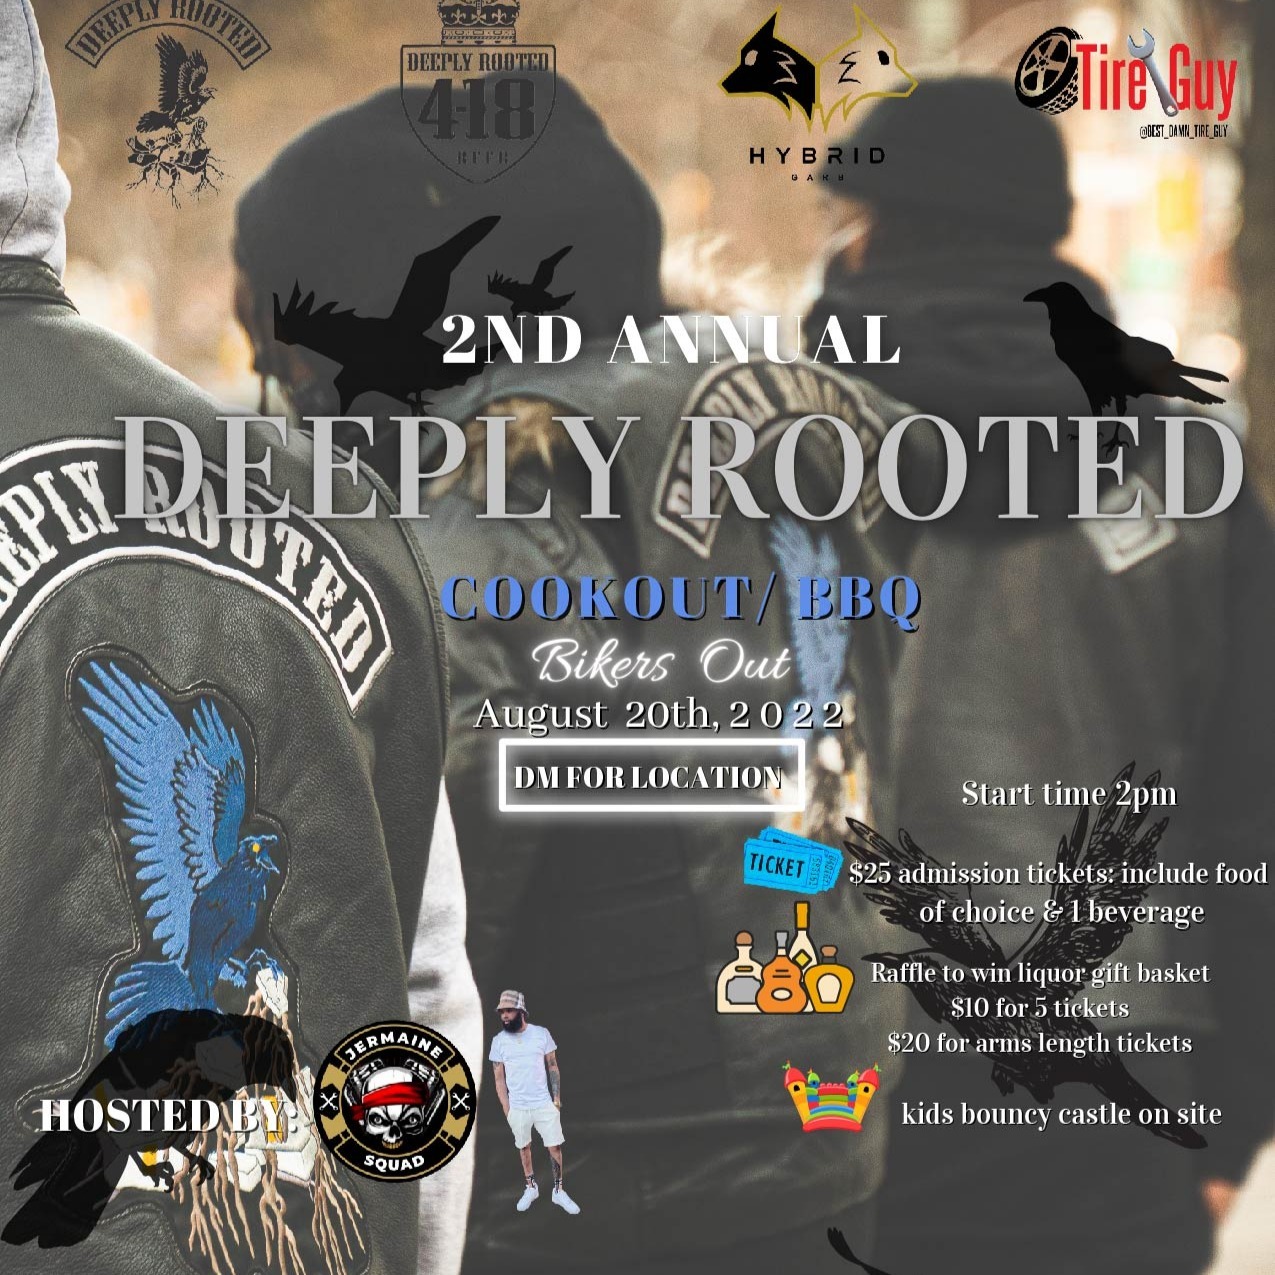 DEEPLY ROOTED | COOKOUT/BBQ